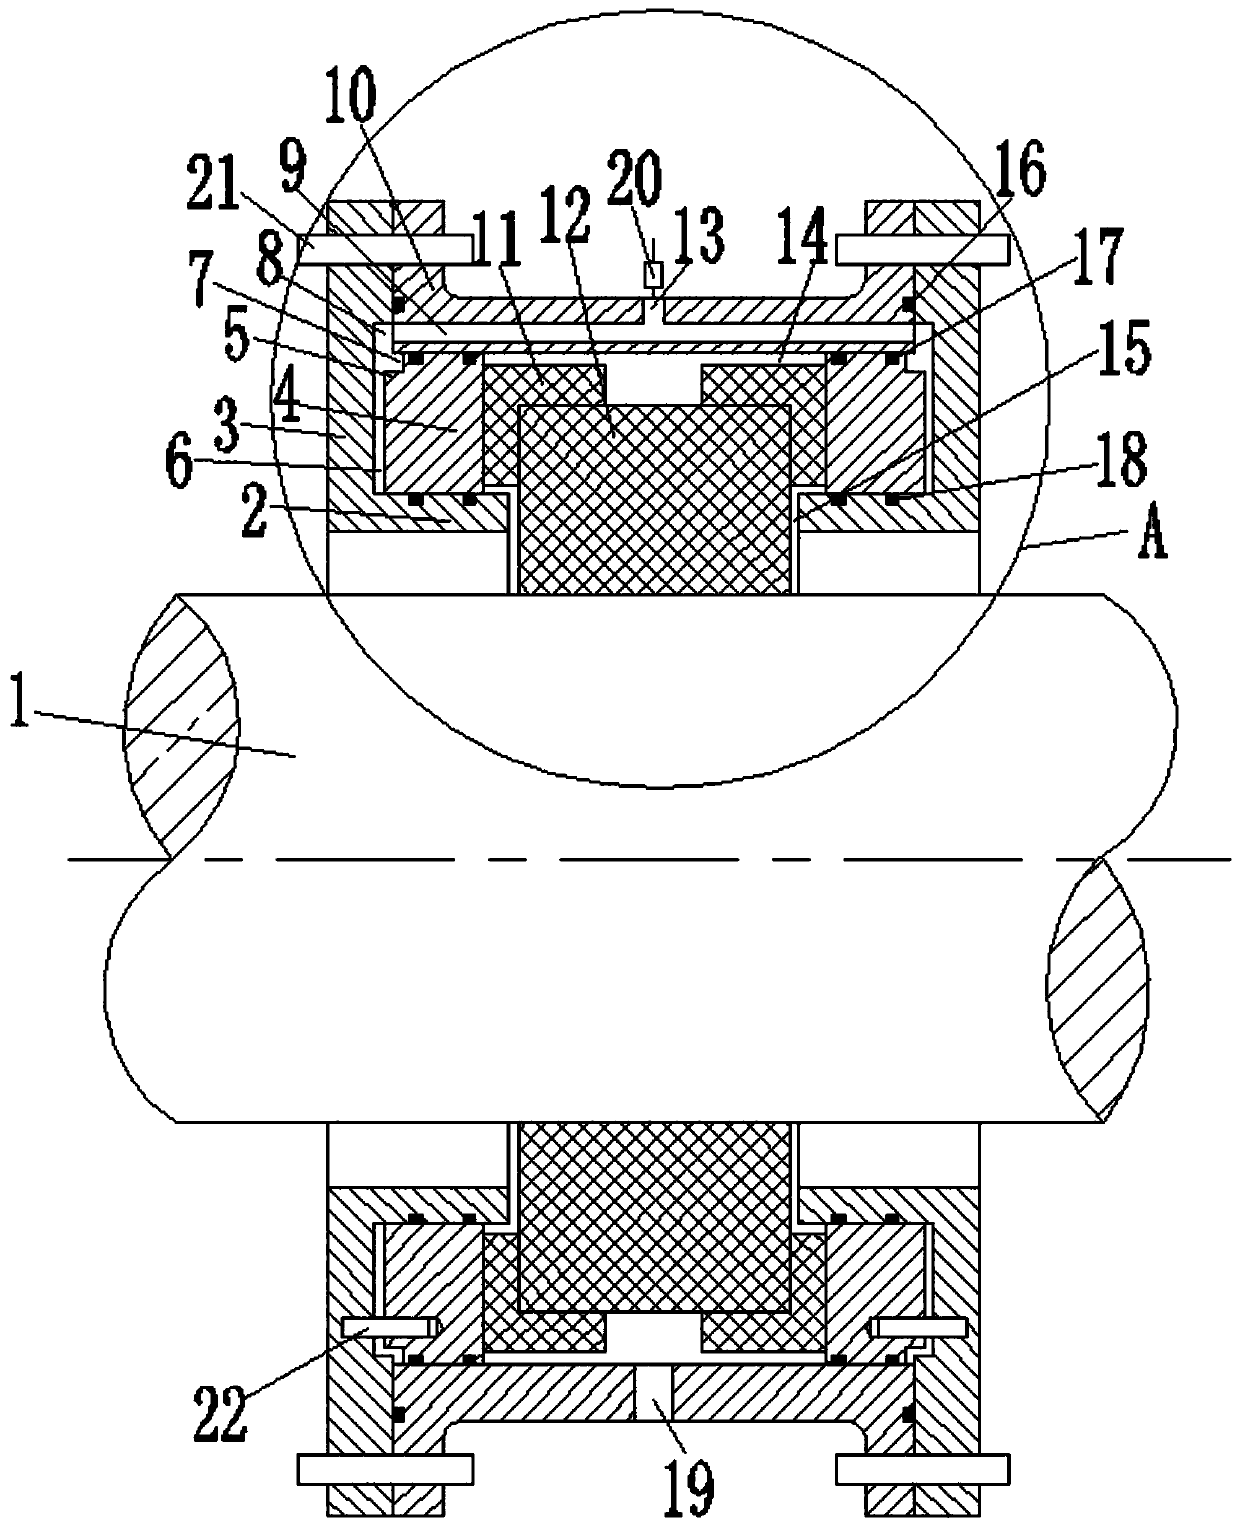 An adjustable pressure double-sided compression sealing device